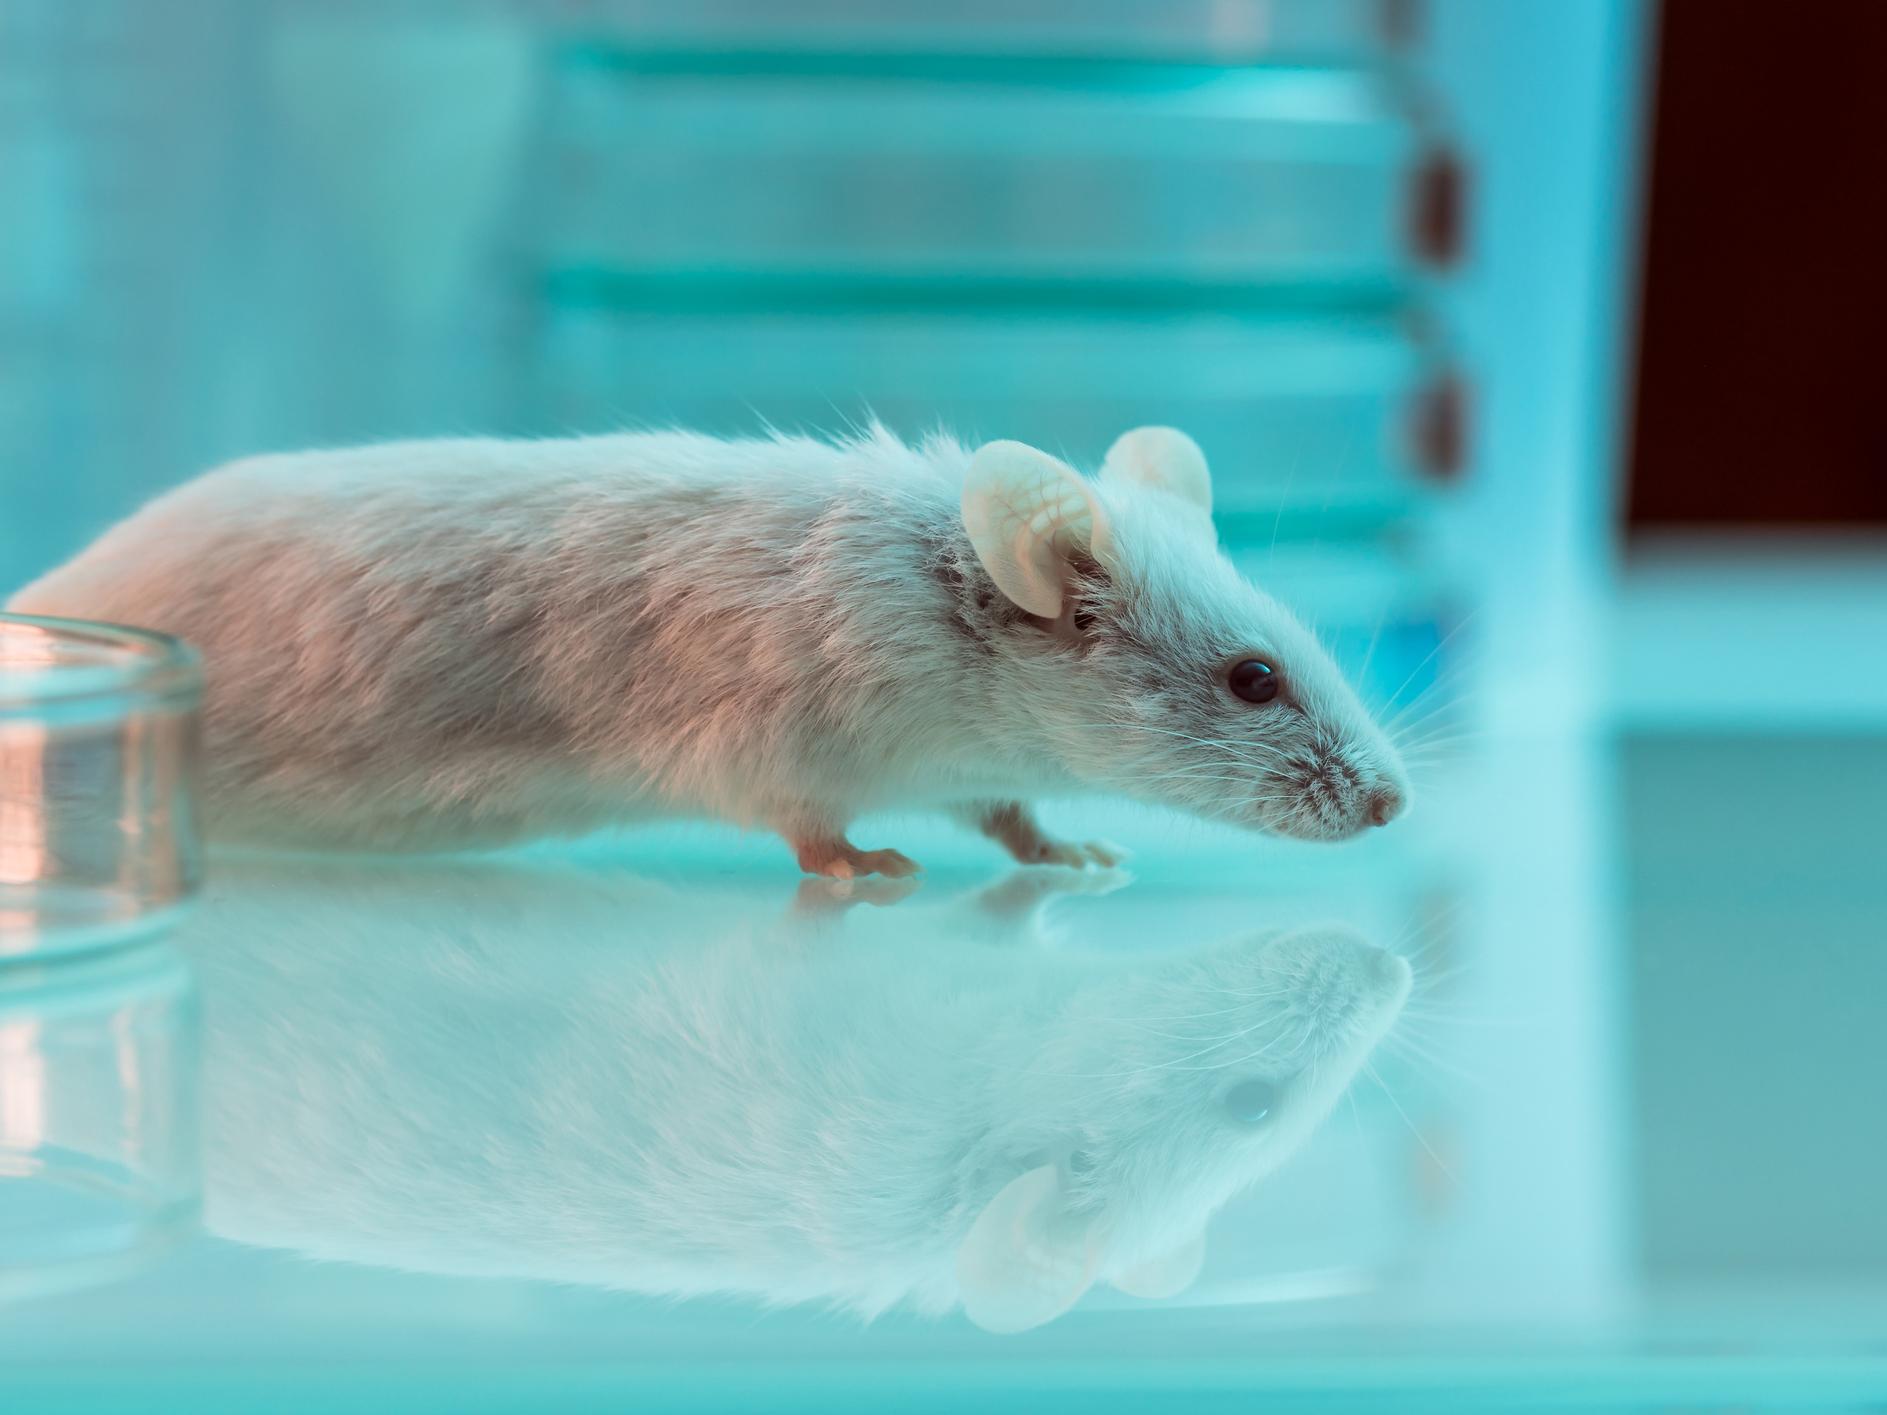 Experiments with mice conducted by a team at Stanford University revealed parts of their brains involved in fear and courage